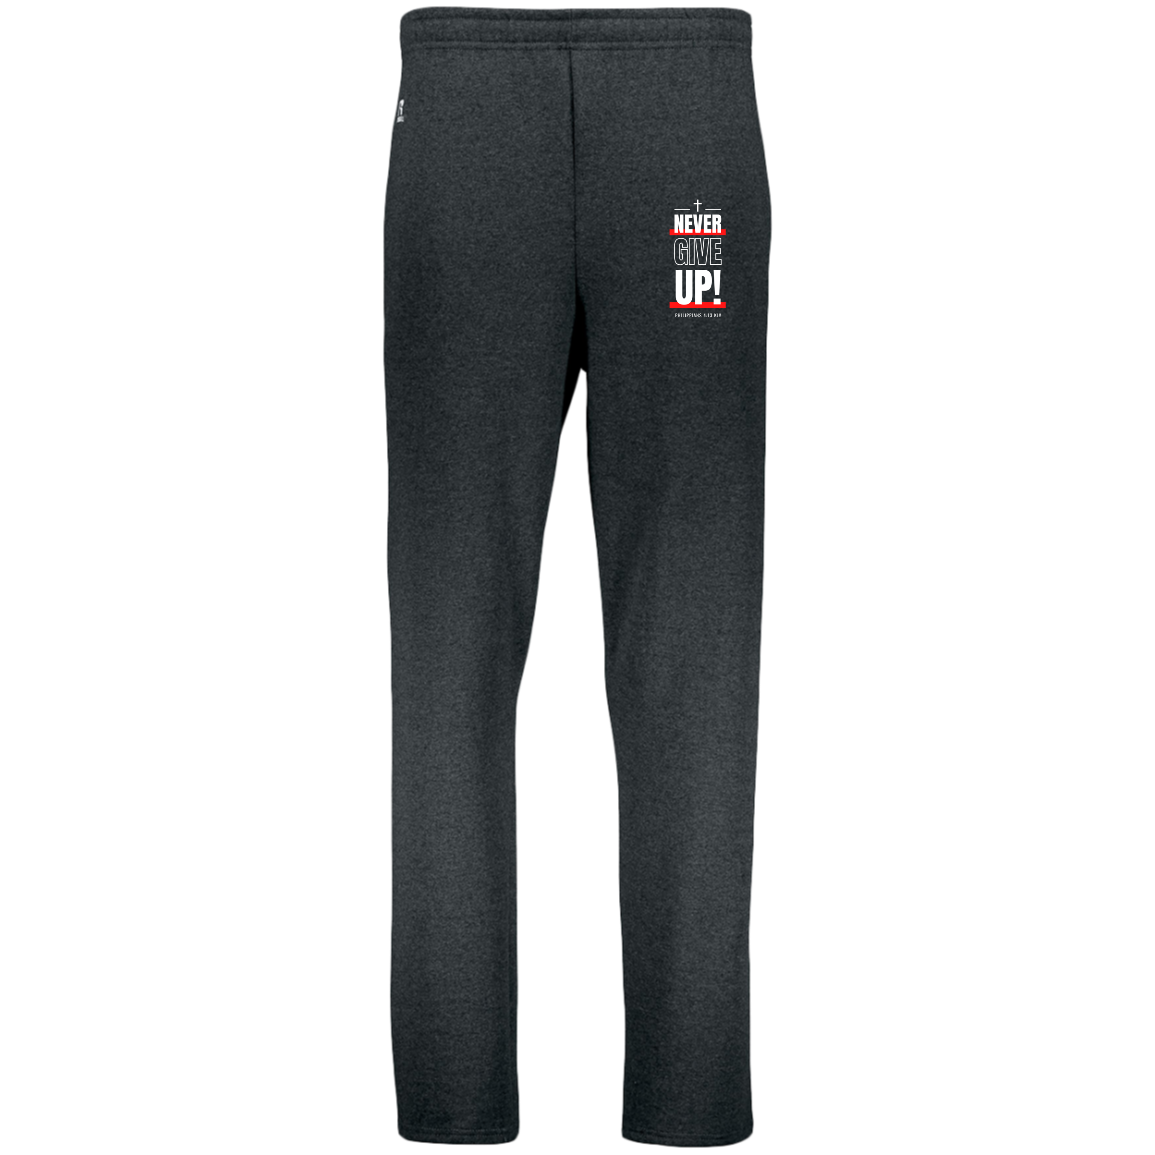 Never Give Up Youth Dri-Power Open Bottom Pocket Sweatpants